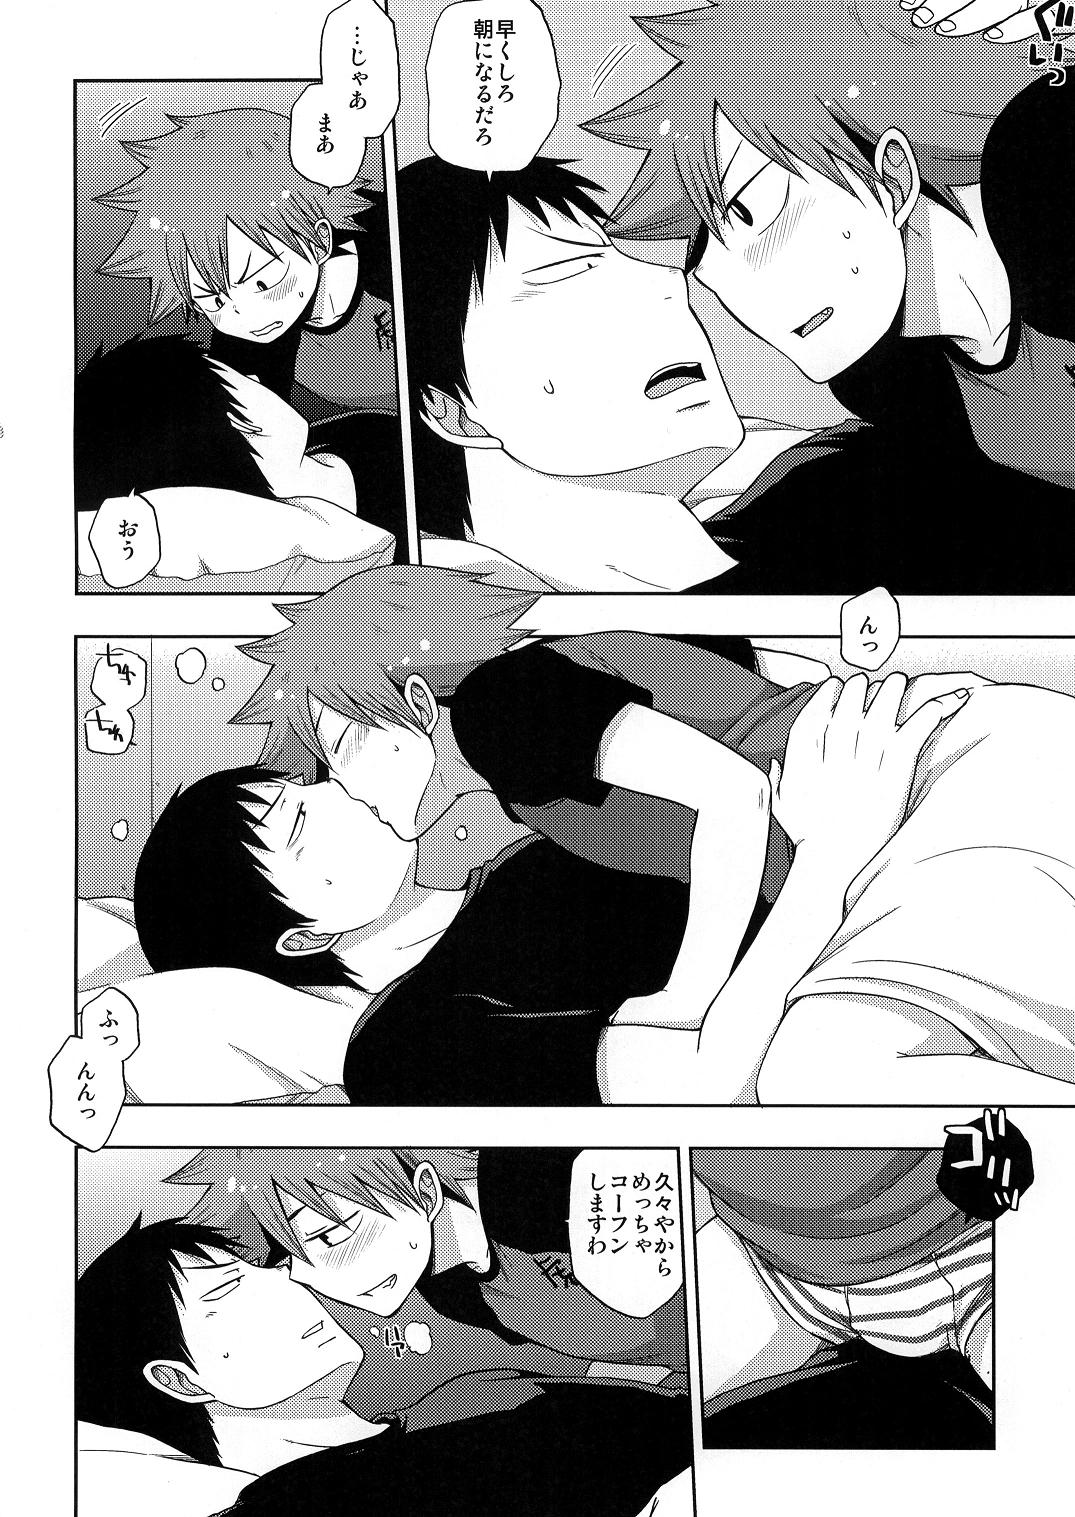 Swing Mischief - Yowamushi pedal Mexican - Page 5